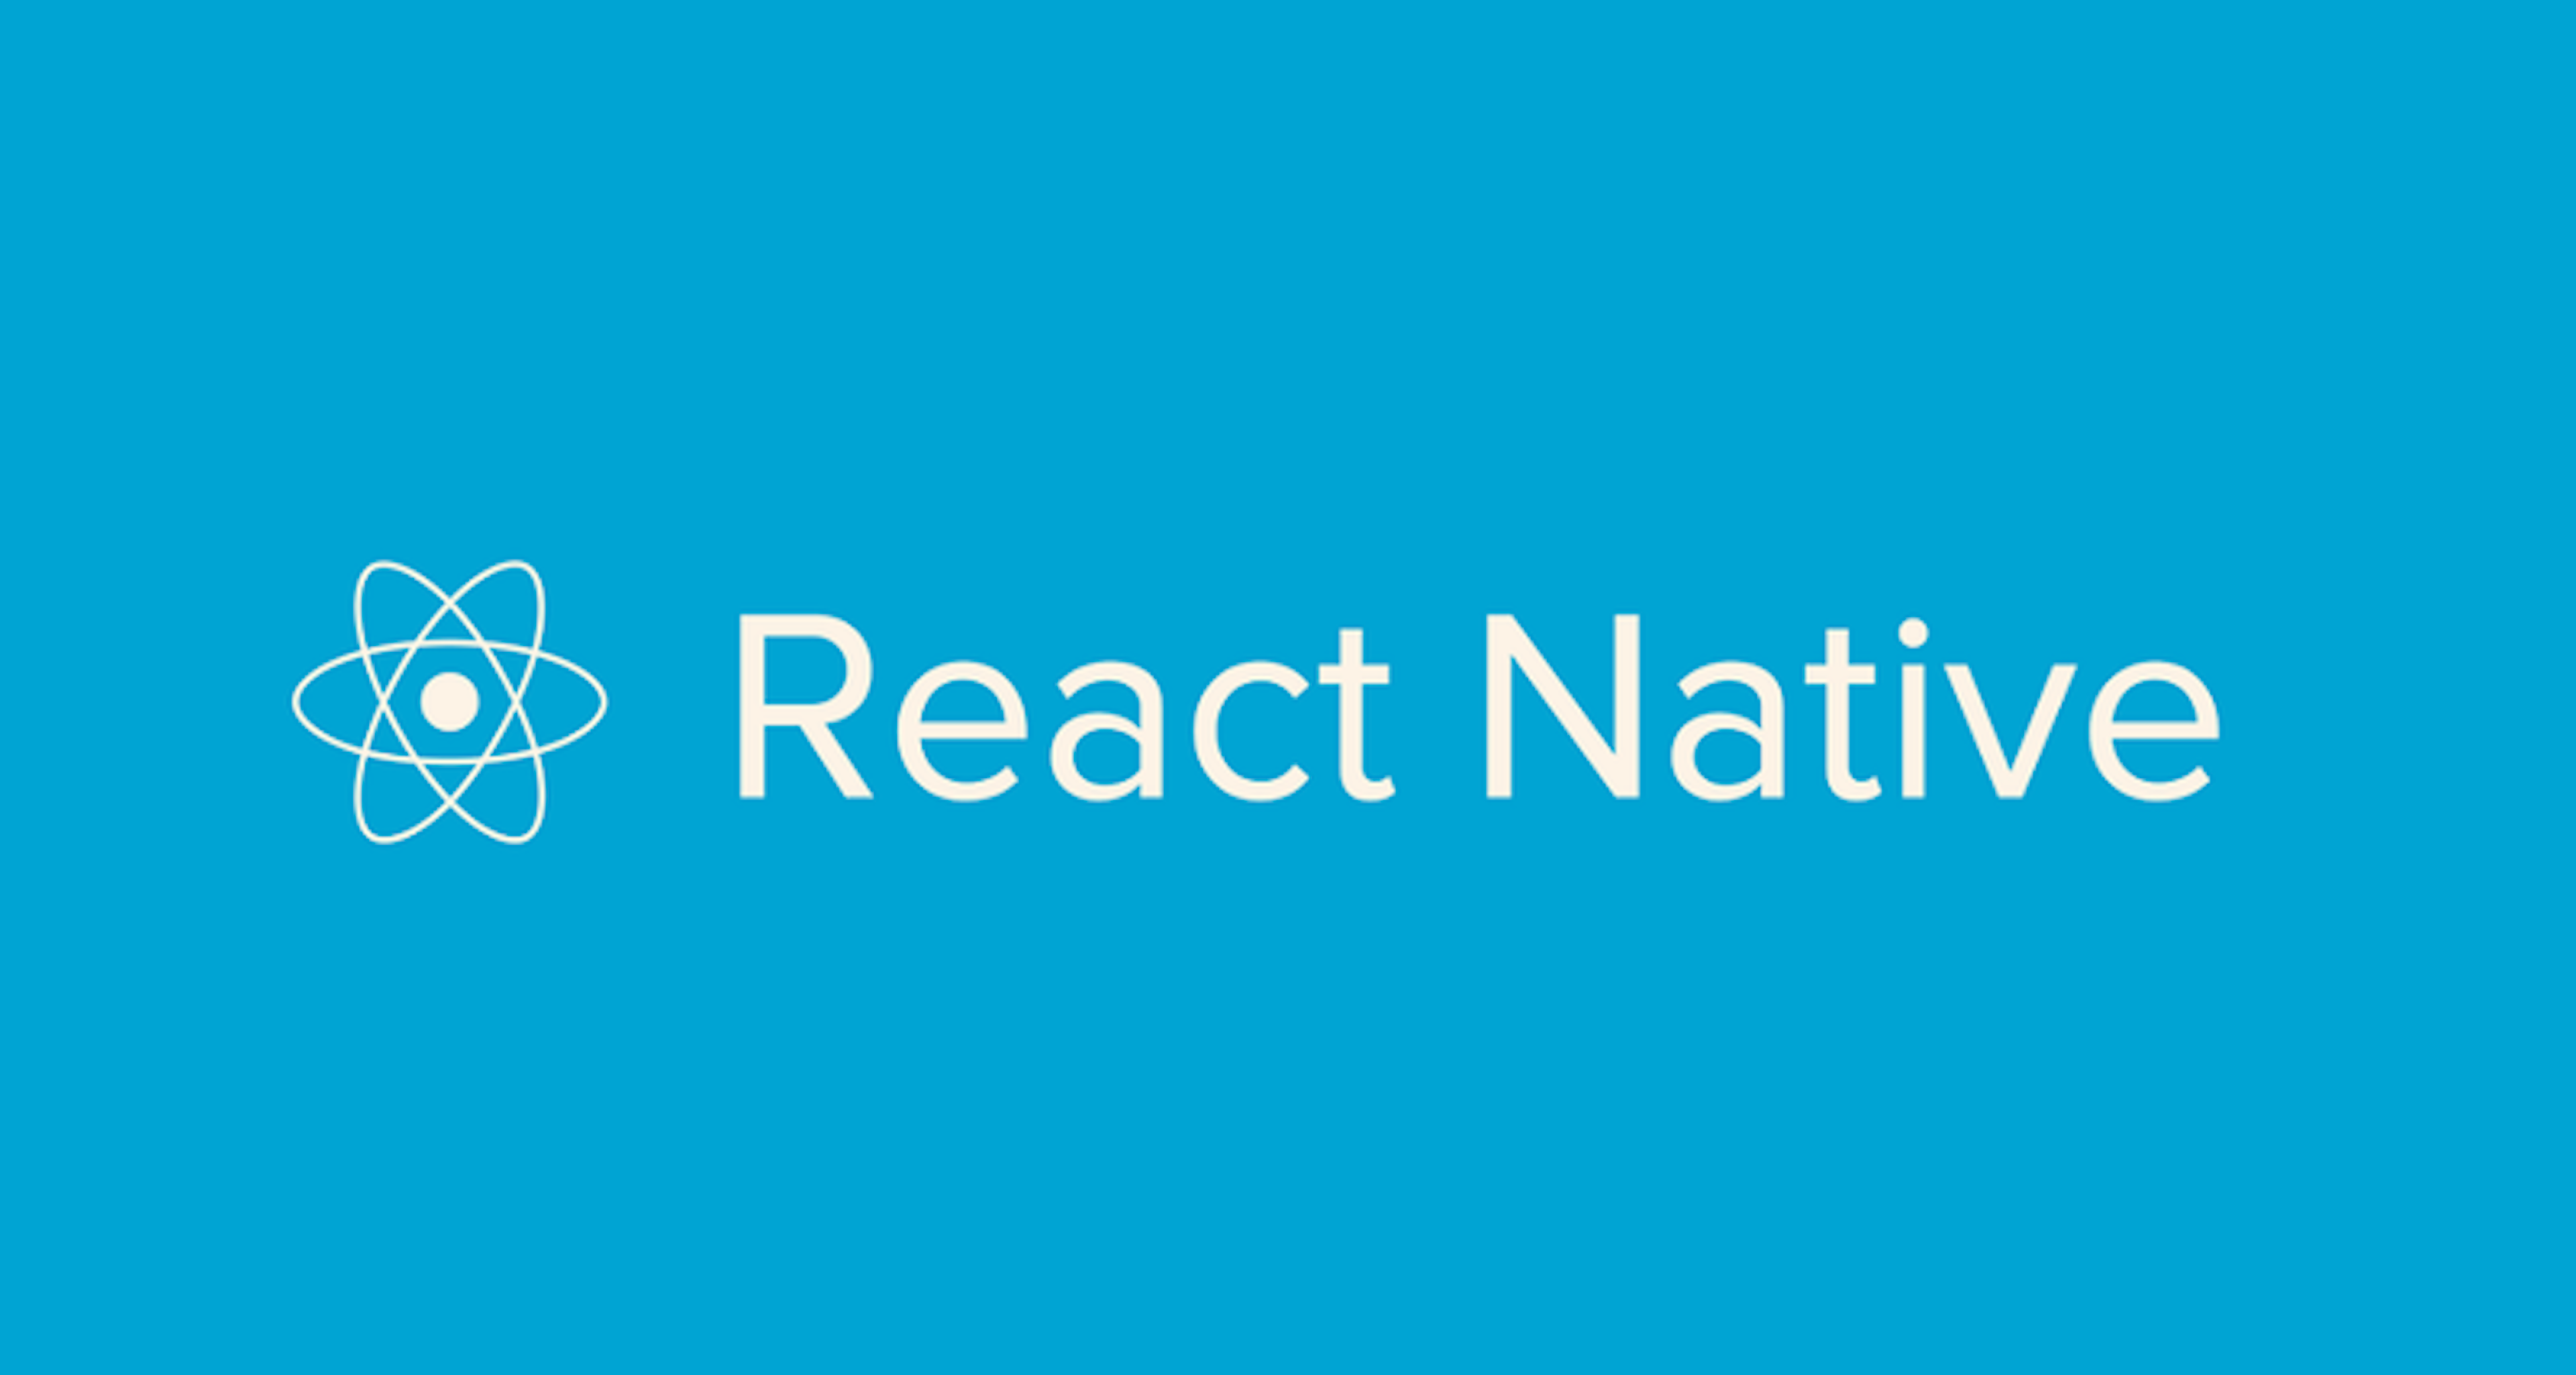 /assets/blog/2017-03-27-react-native-a-first-try/react-native-51b41f03fd.png